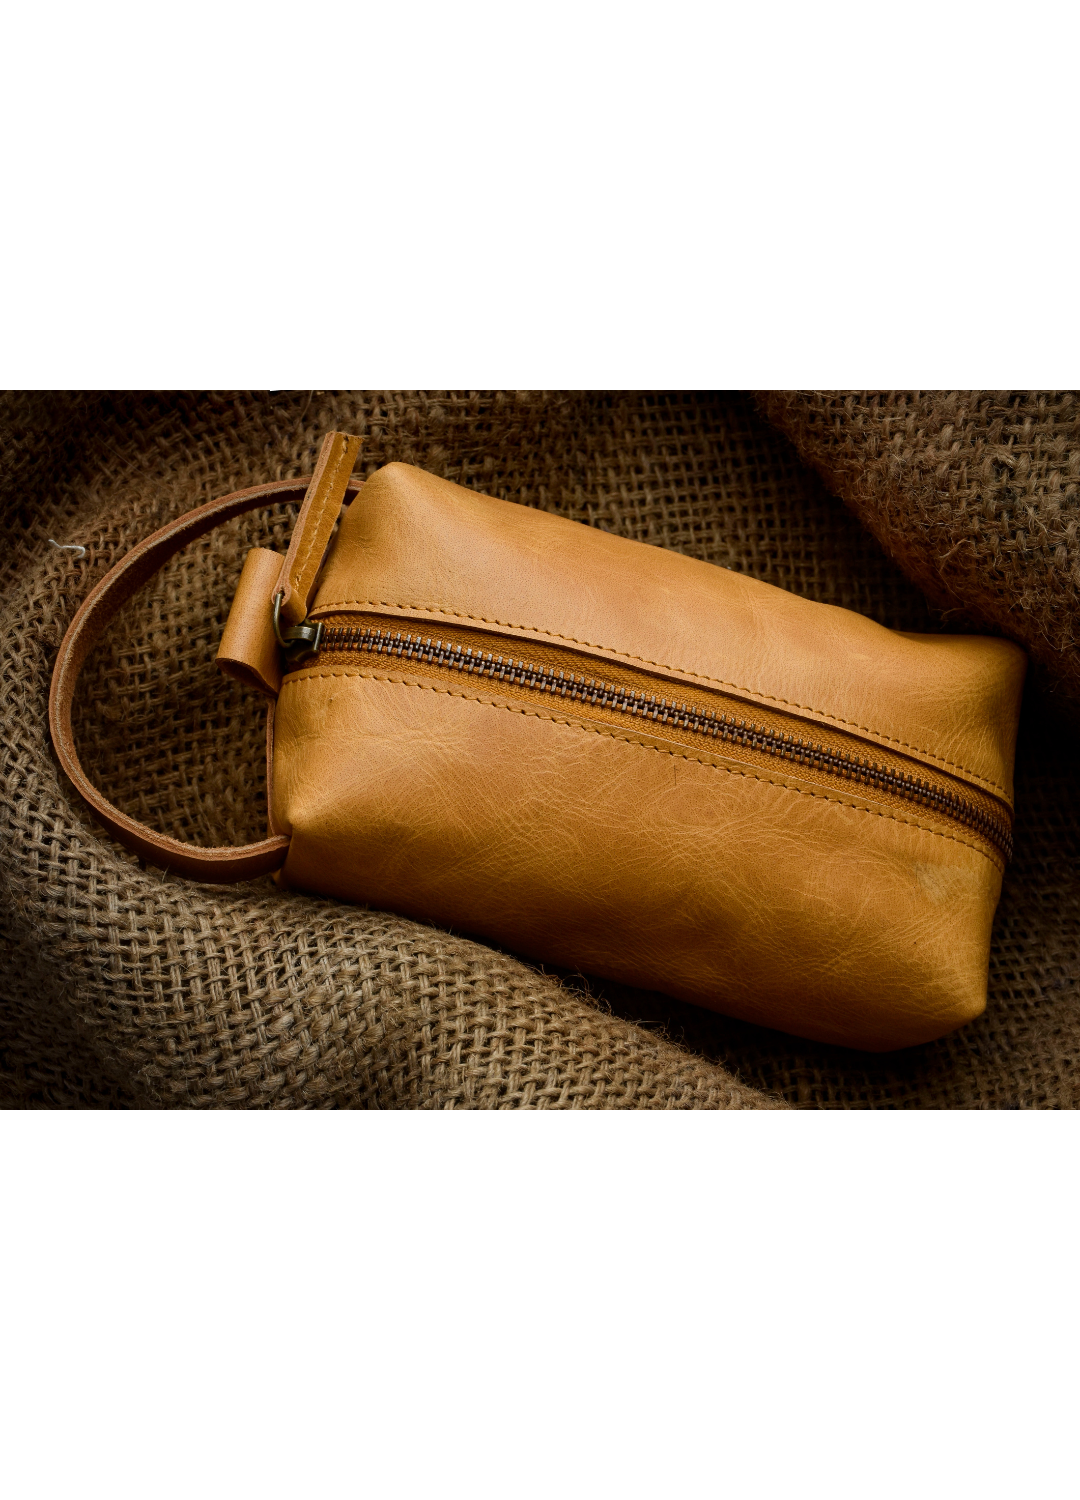 Nappa leather toiletry bag with zip · Black, Brown · Accessories